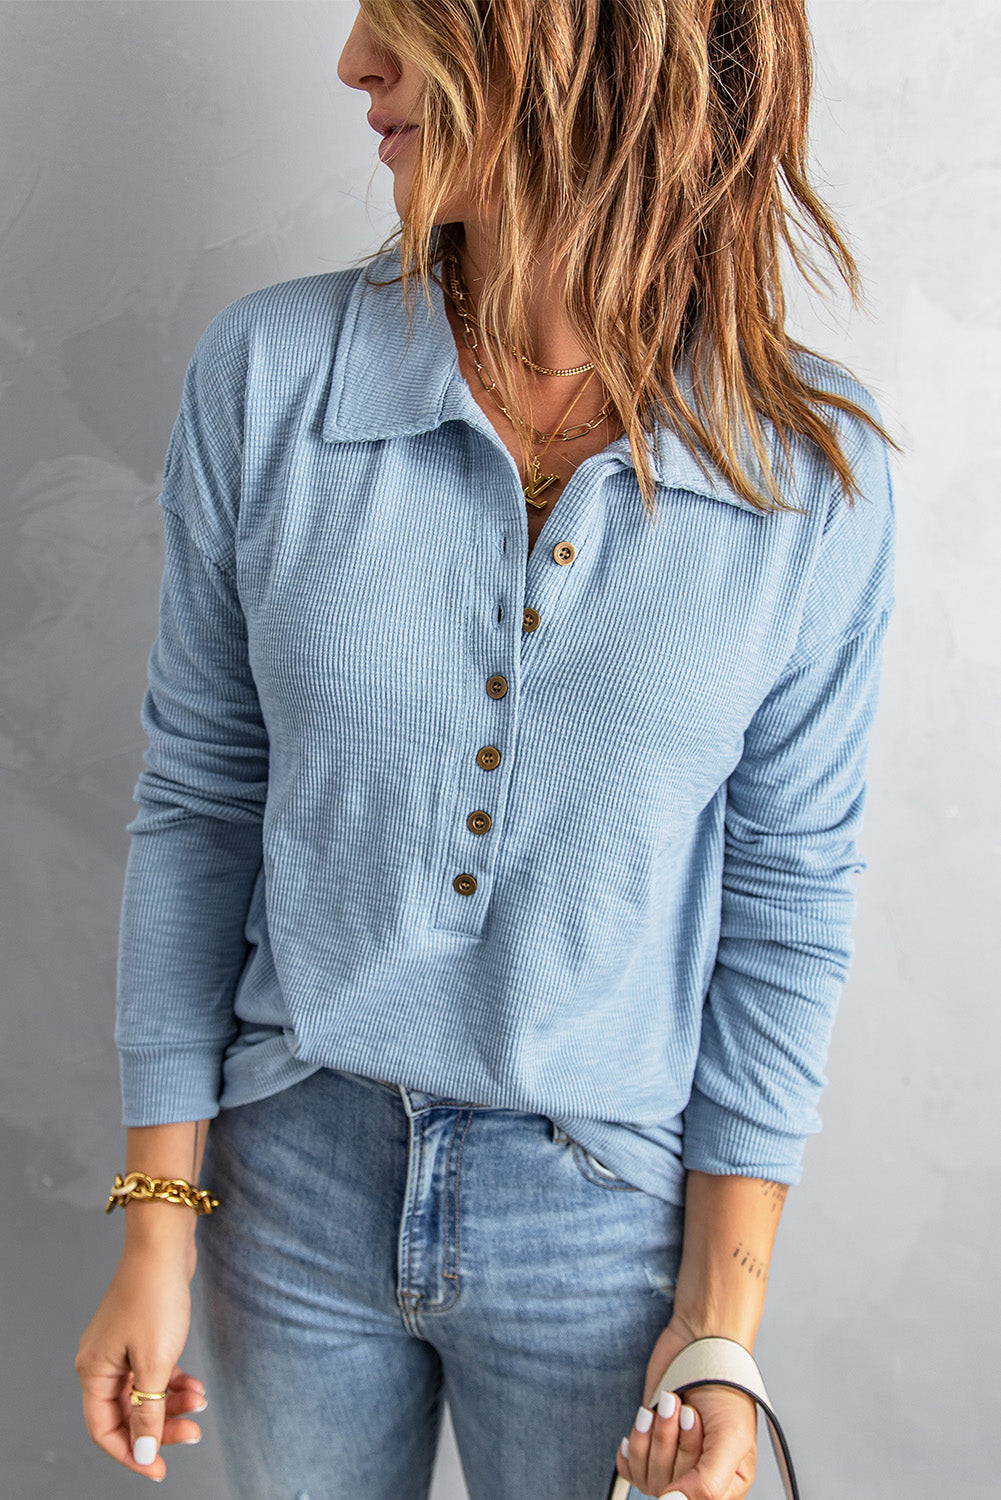 Half Button Collared Knit Top - Apparel & Accessories Girl Code